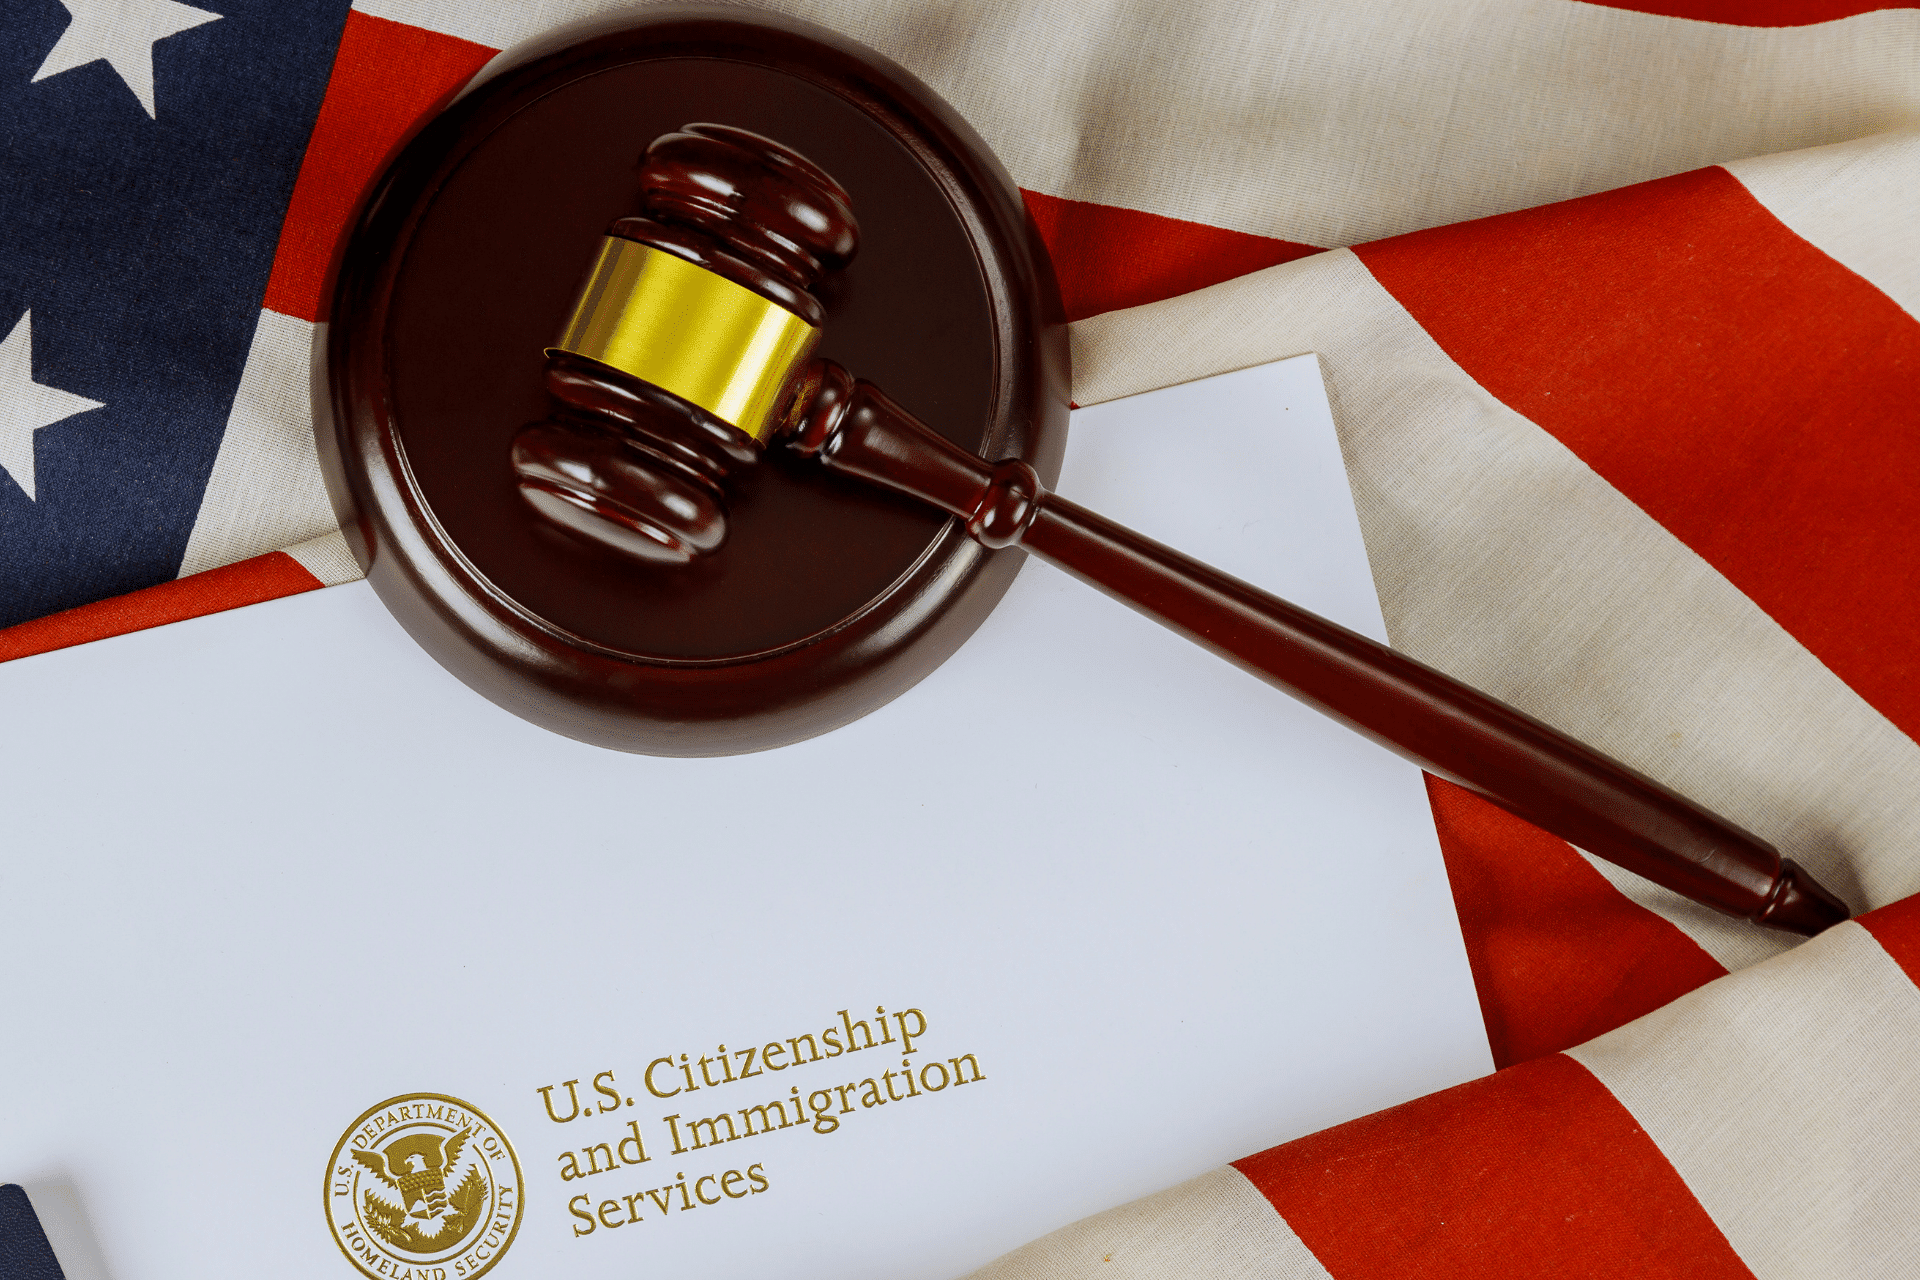 gavel and US Citizenship and Immigration Services logo on a U.S. flag